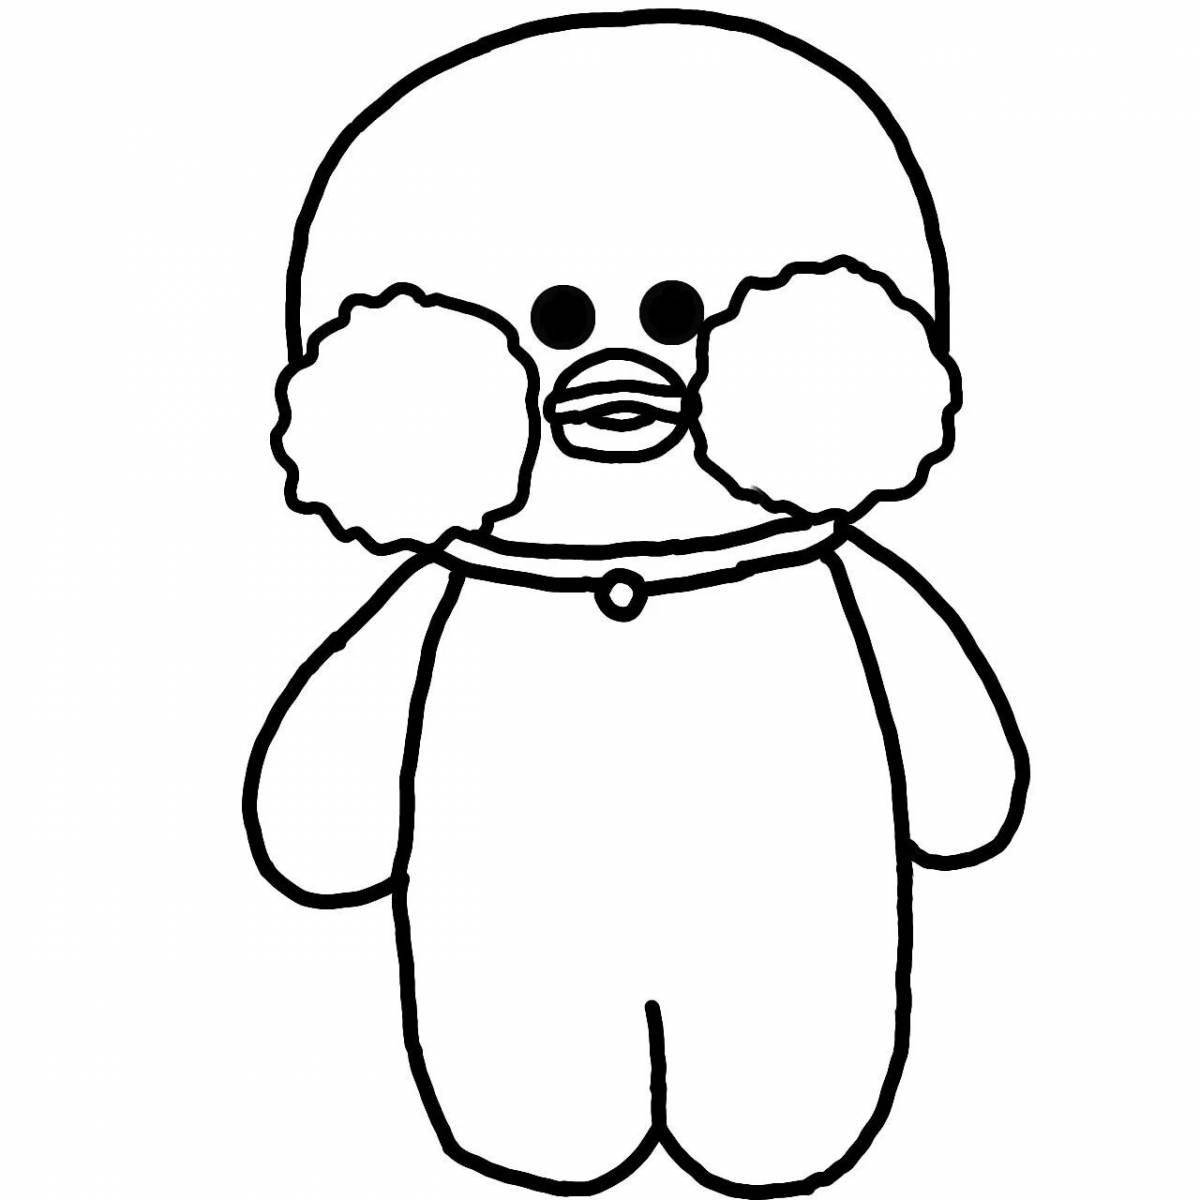 Cute lalaphan duck coloring book with clothes